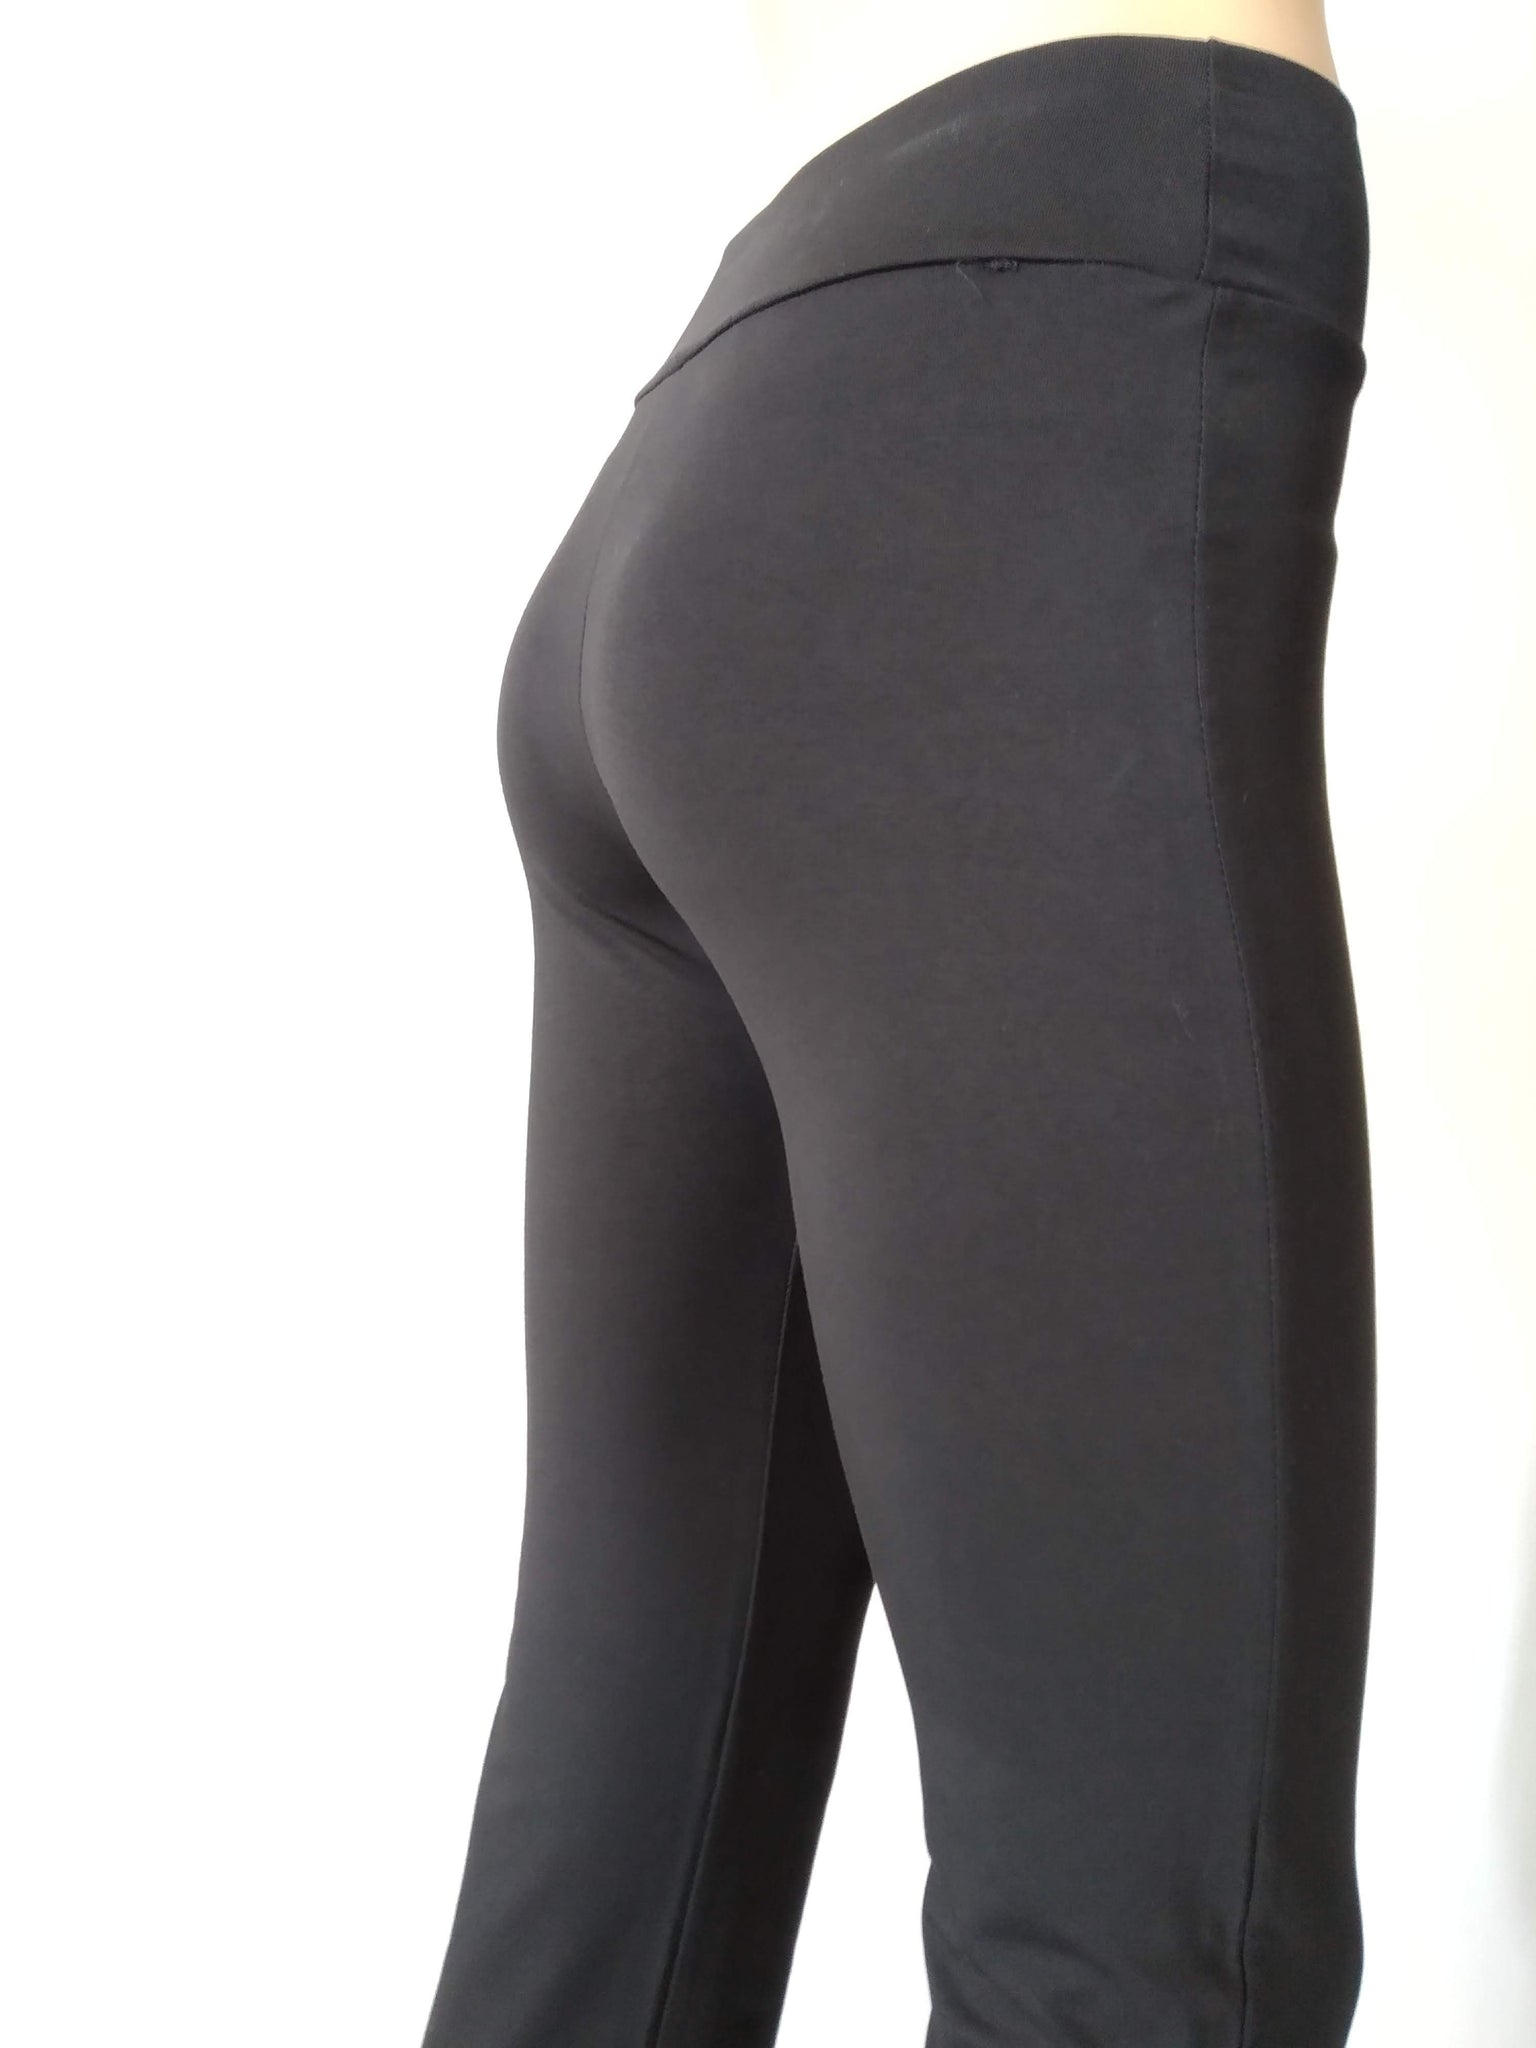 side view of this great black cotton high-waisted leggings. straight tube cut up to the ankles.